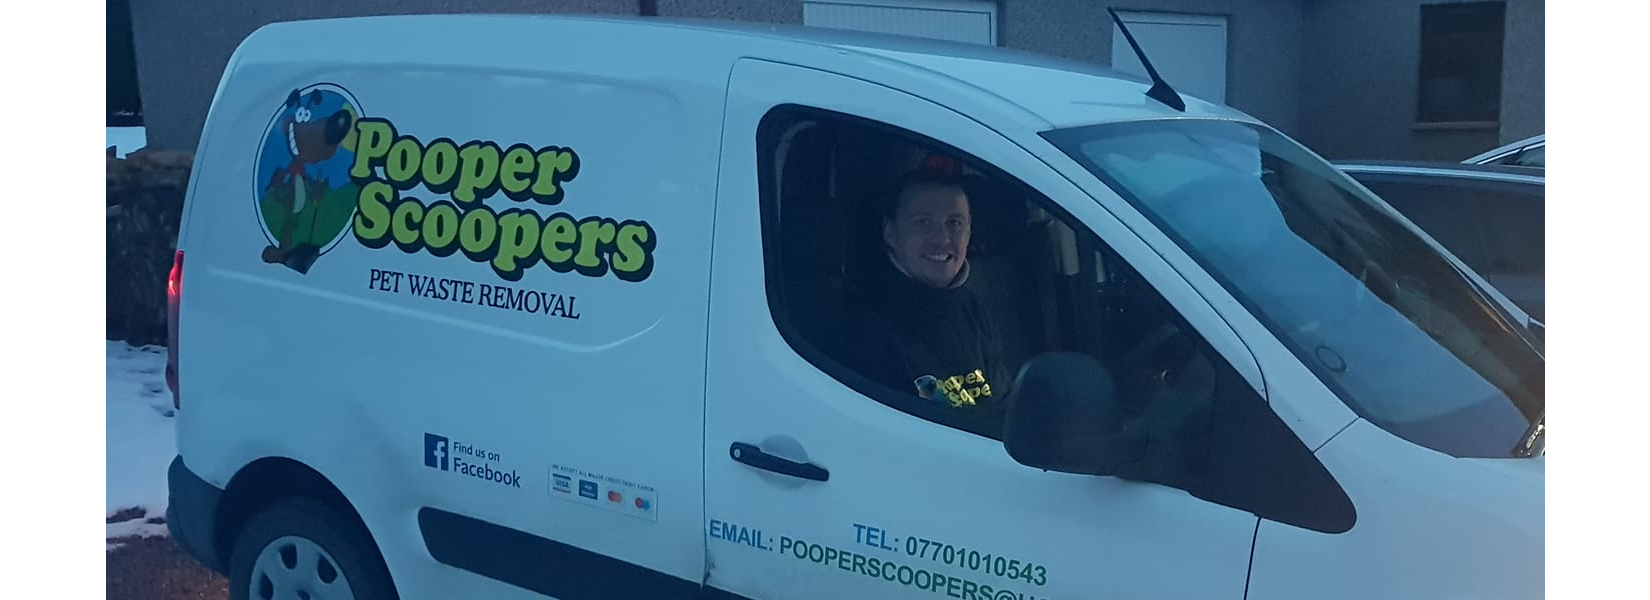 Pooper Scoopers, Inverness, using Squeegee to manage their business